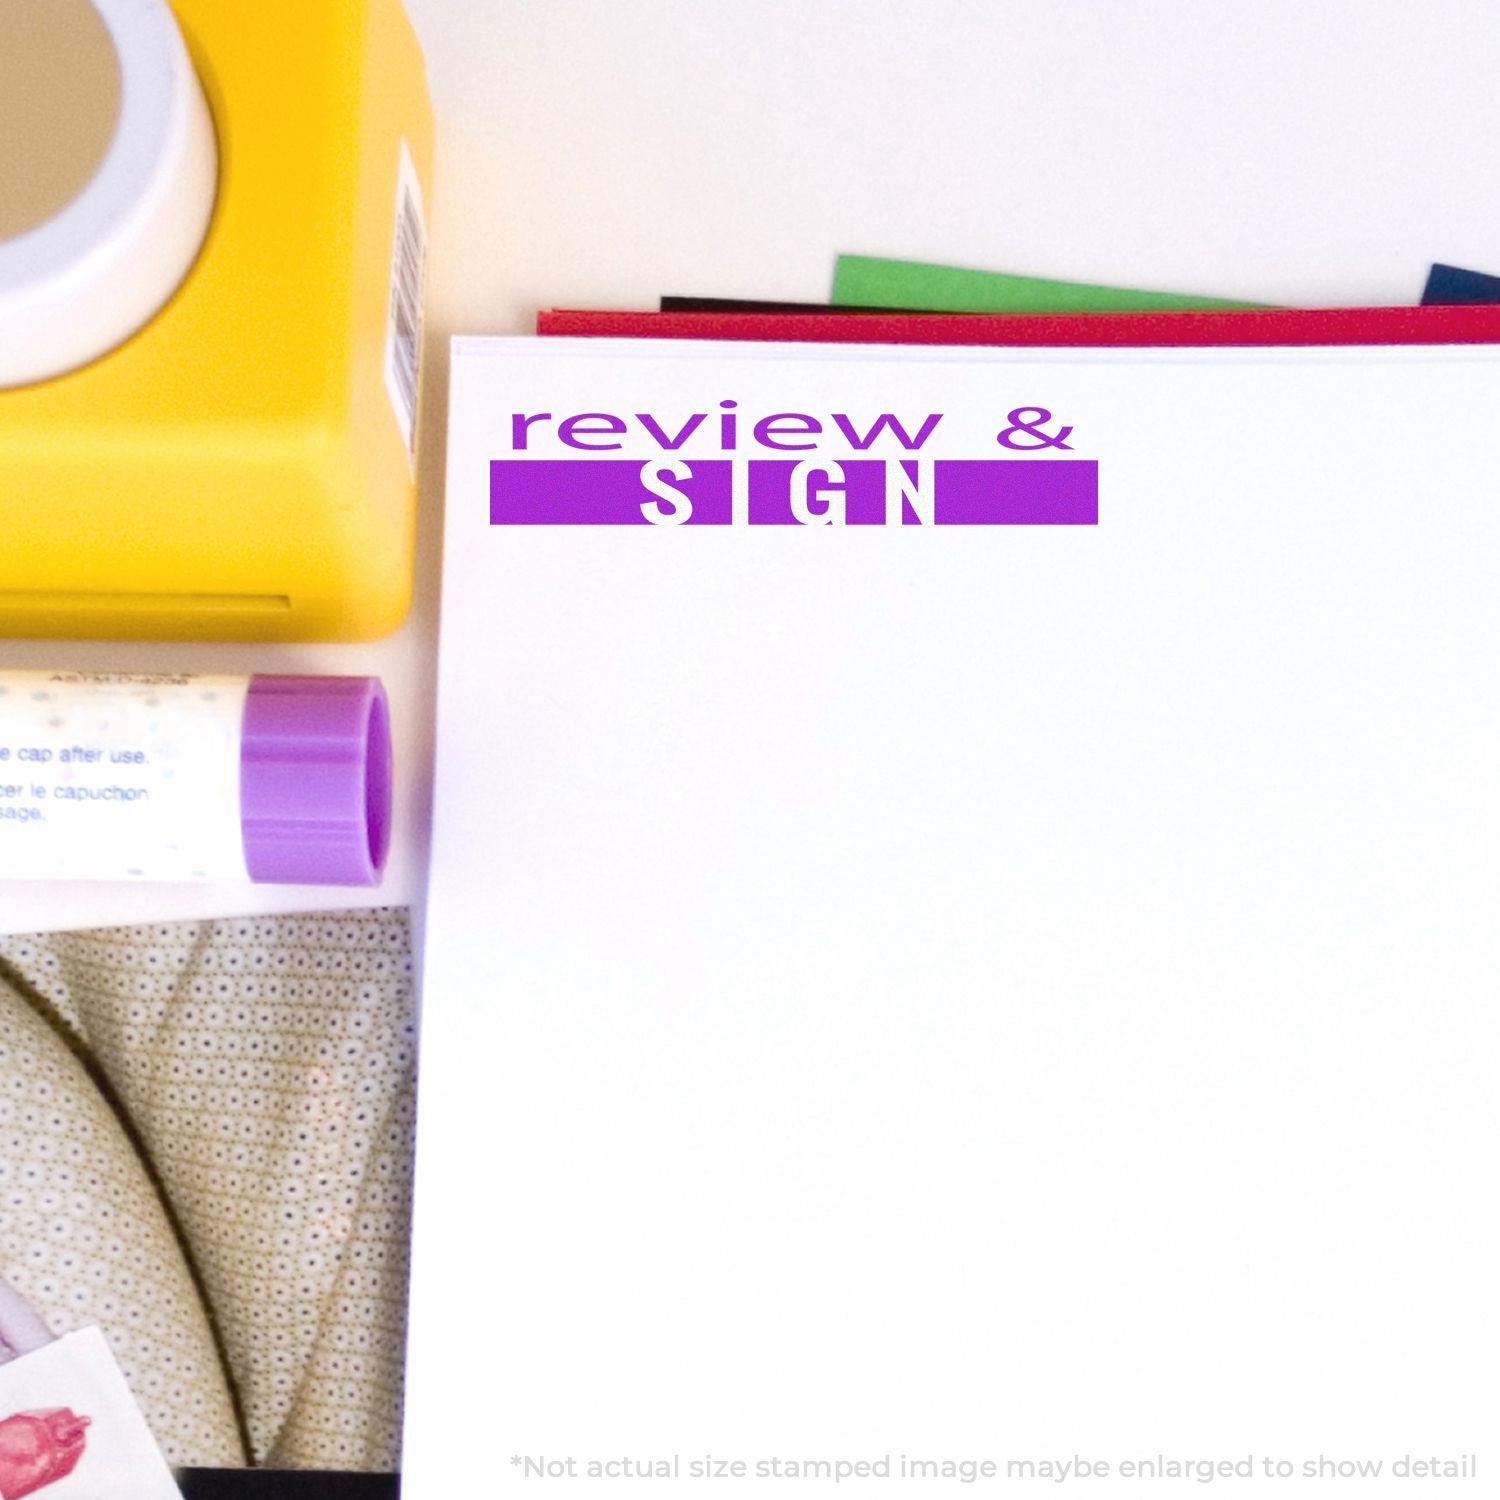 A self-inking stamp with a stamped image showing how the text "review & SIGN" in a bold font with a dual-colored marking is displayed after stamping.